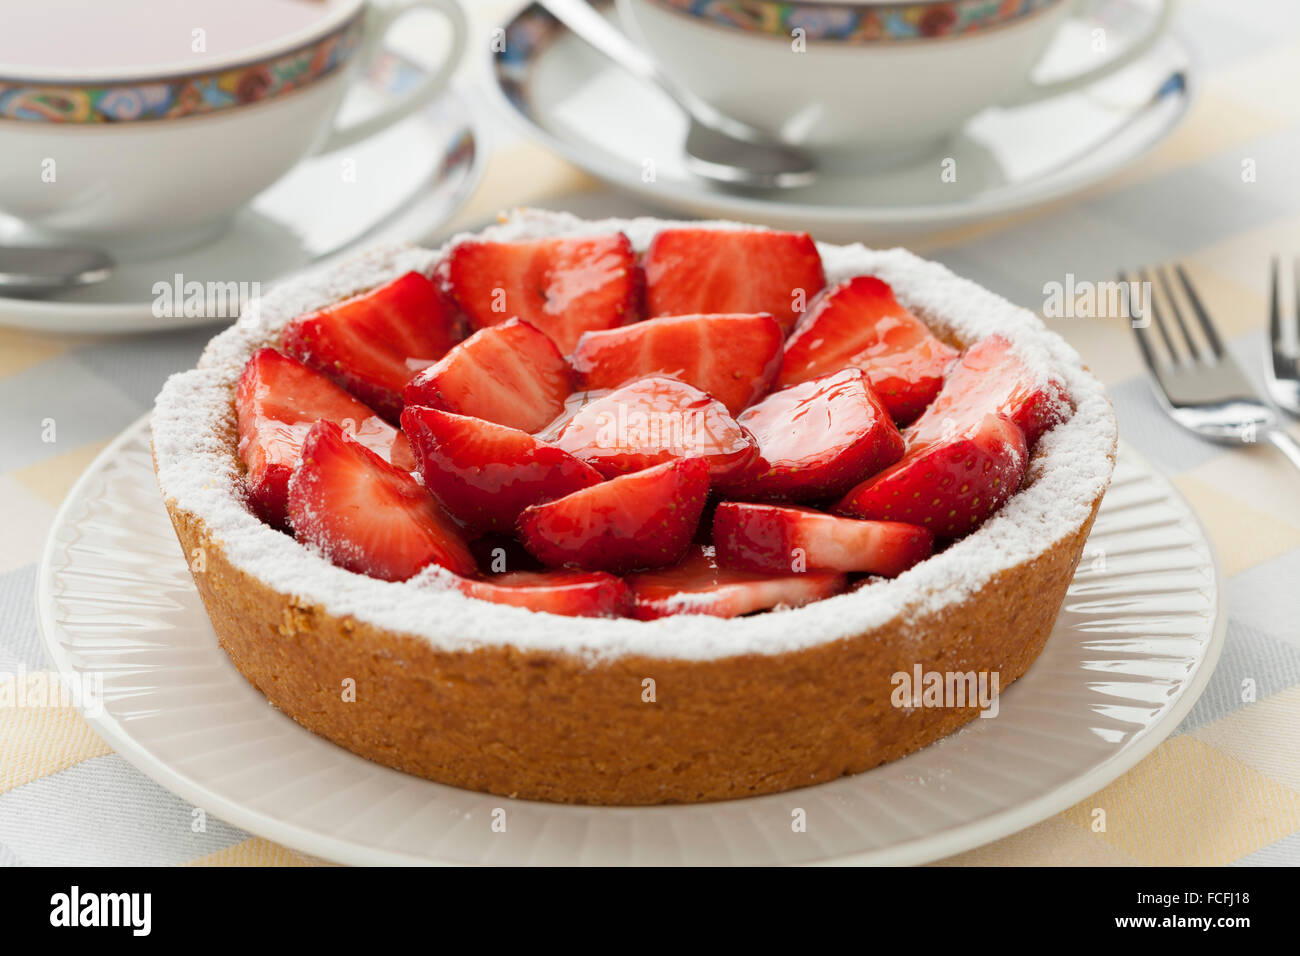 Fresh homemade strawberry pastry at tea time Stock Photo